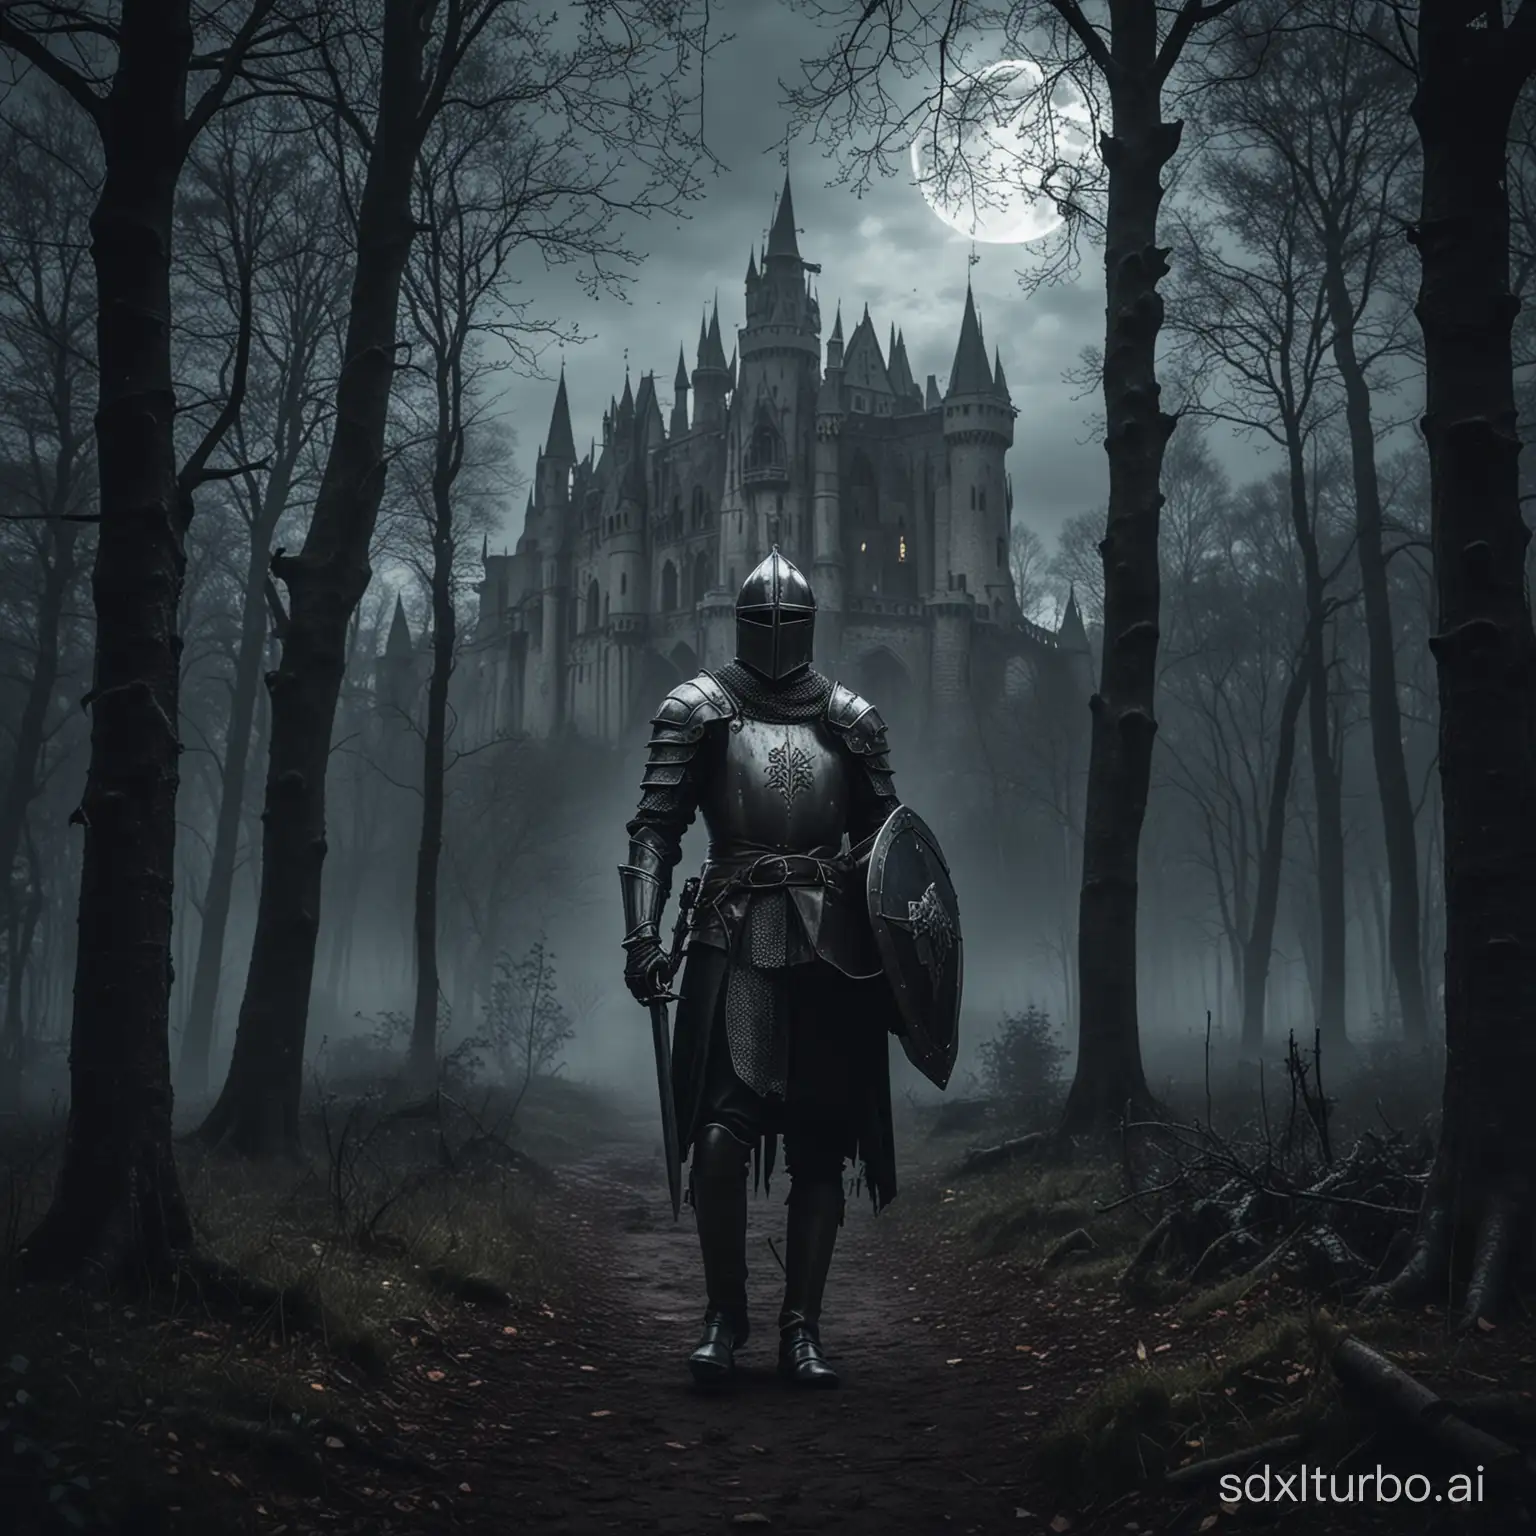 Medieval knight in the dark forest and the background is a big gothic castle